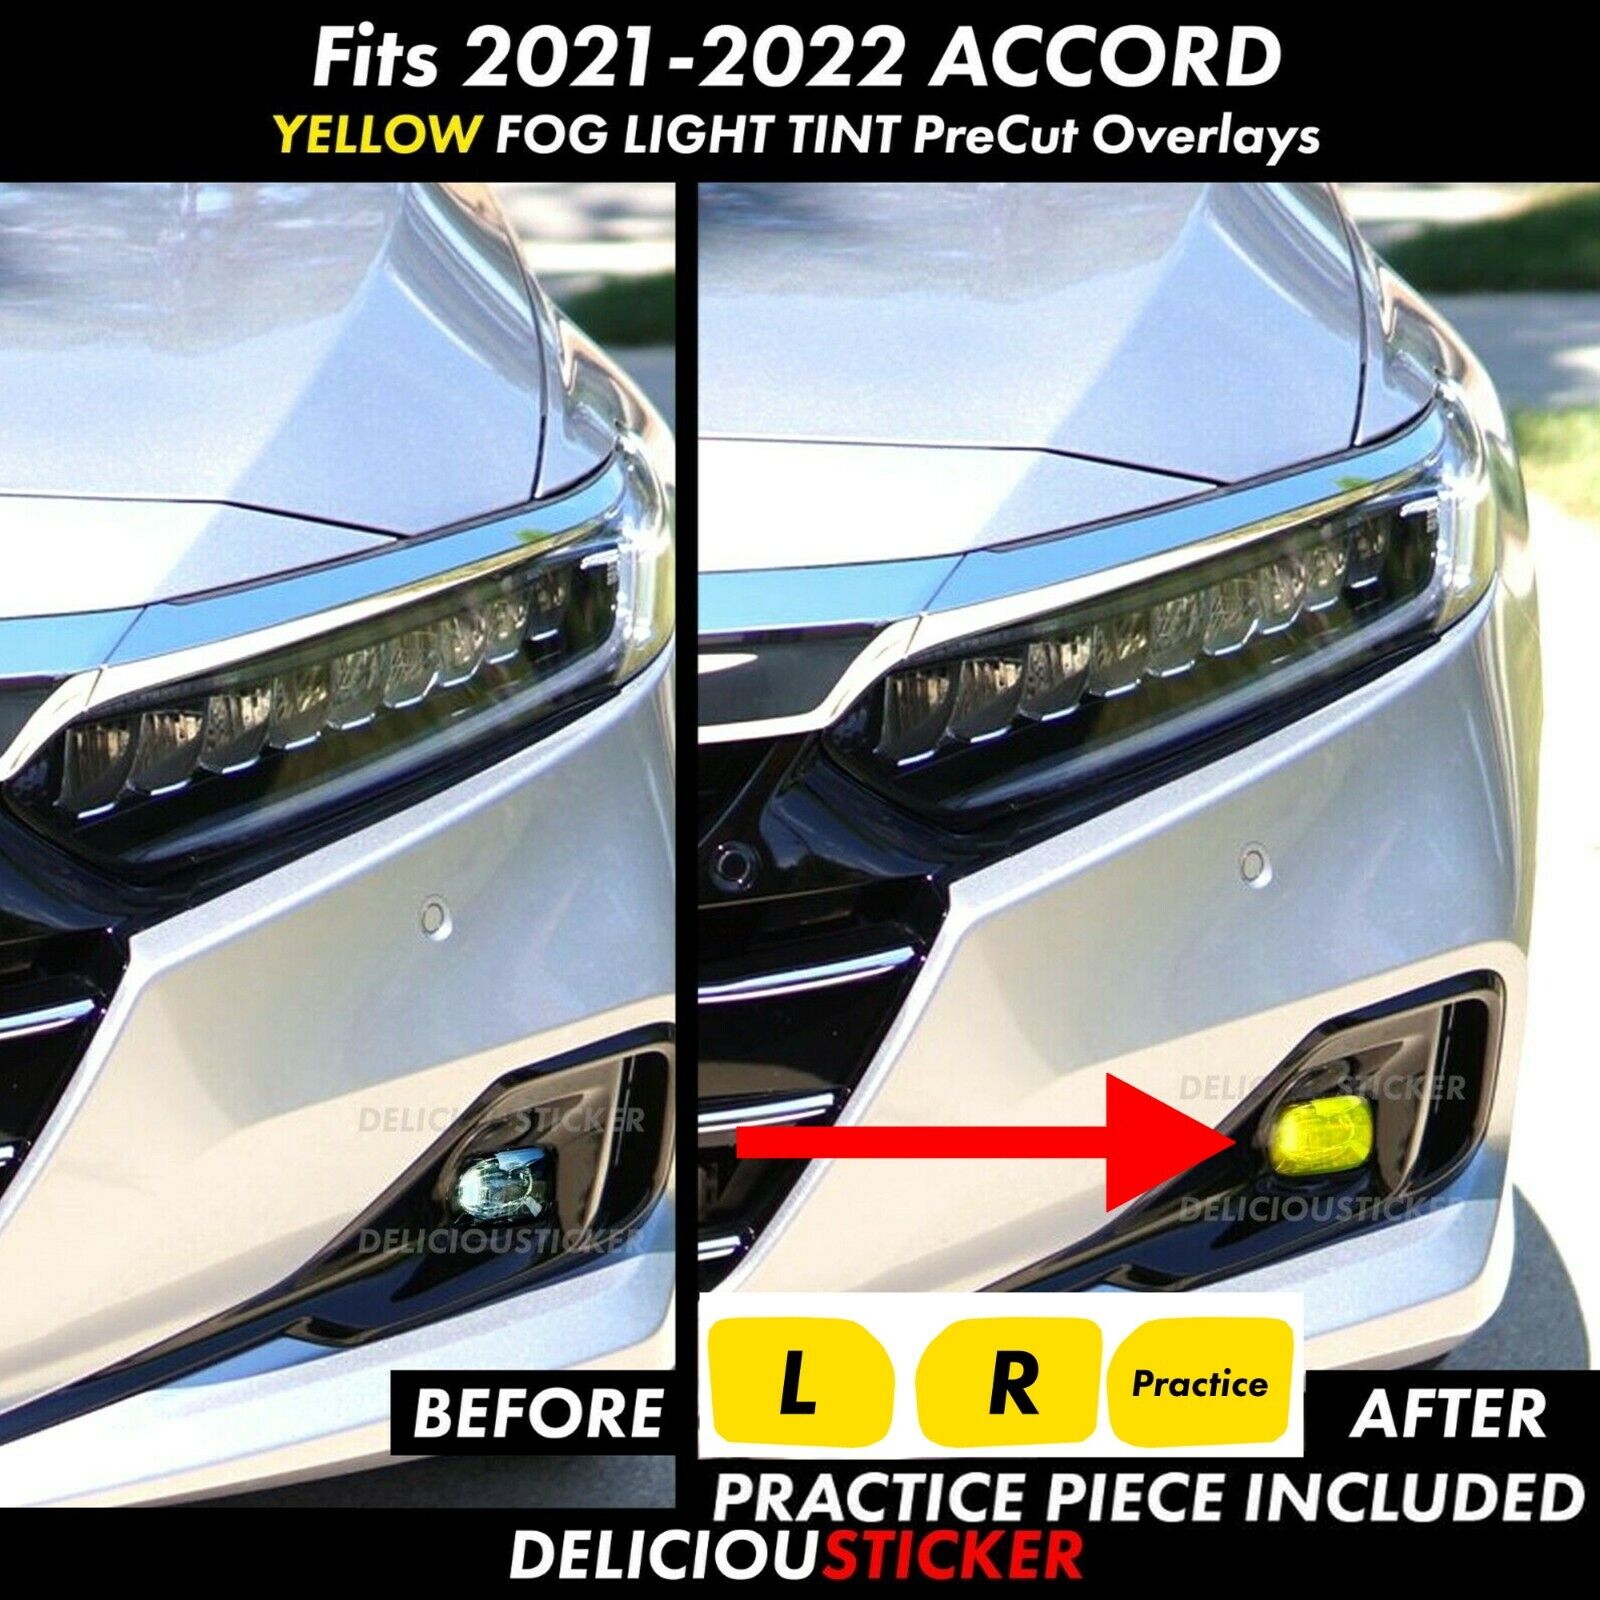 For Accord 2021-2022 Yellow Fog Lights Front overlays vinyl tint precut decals